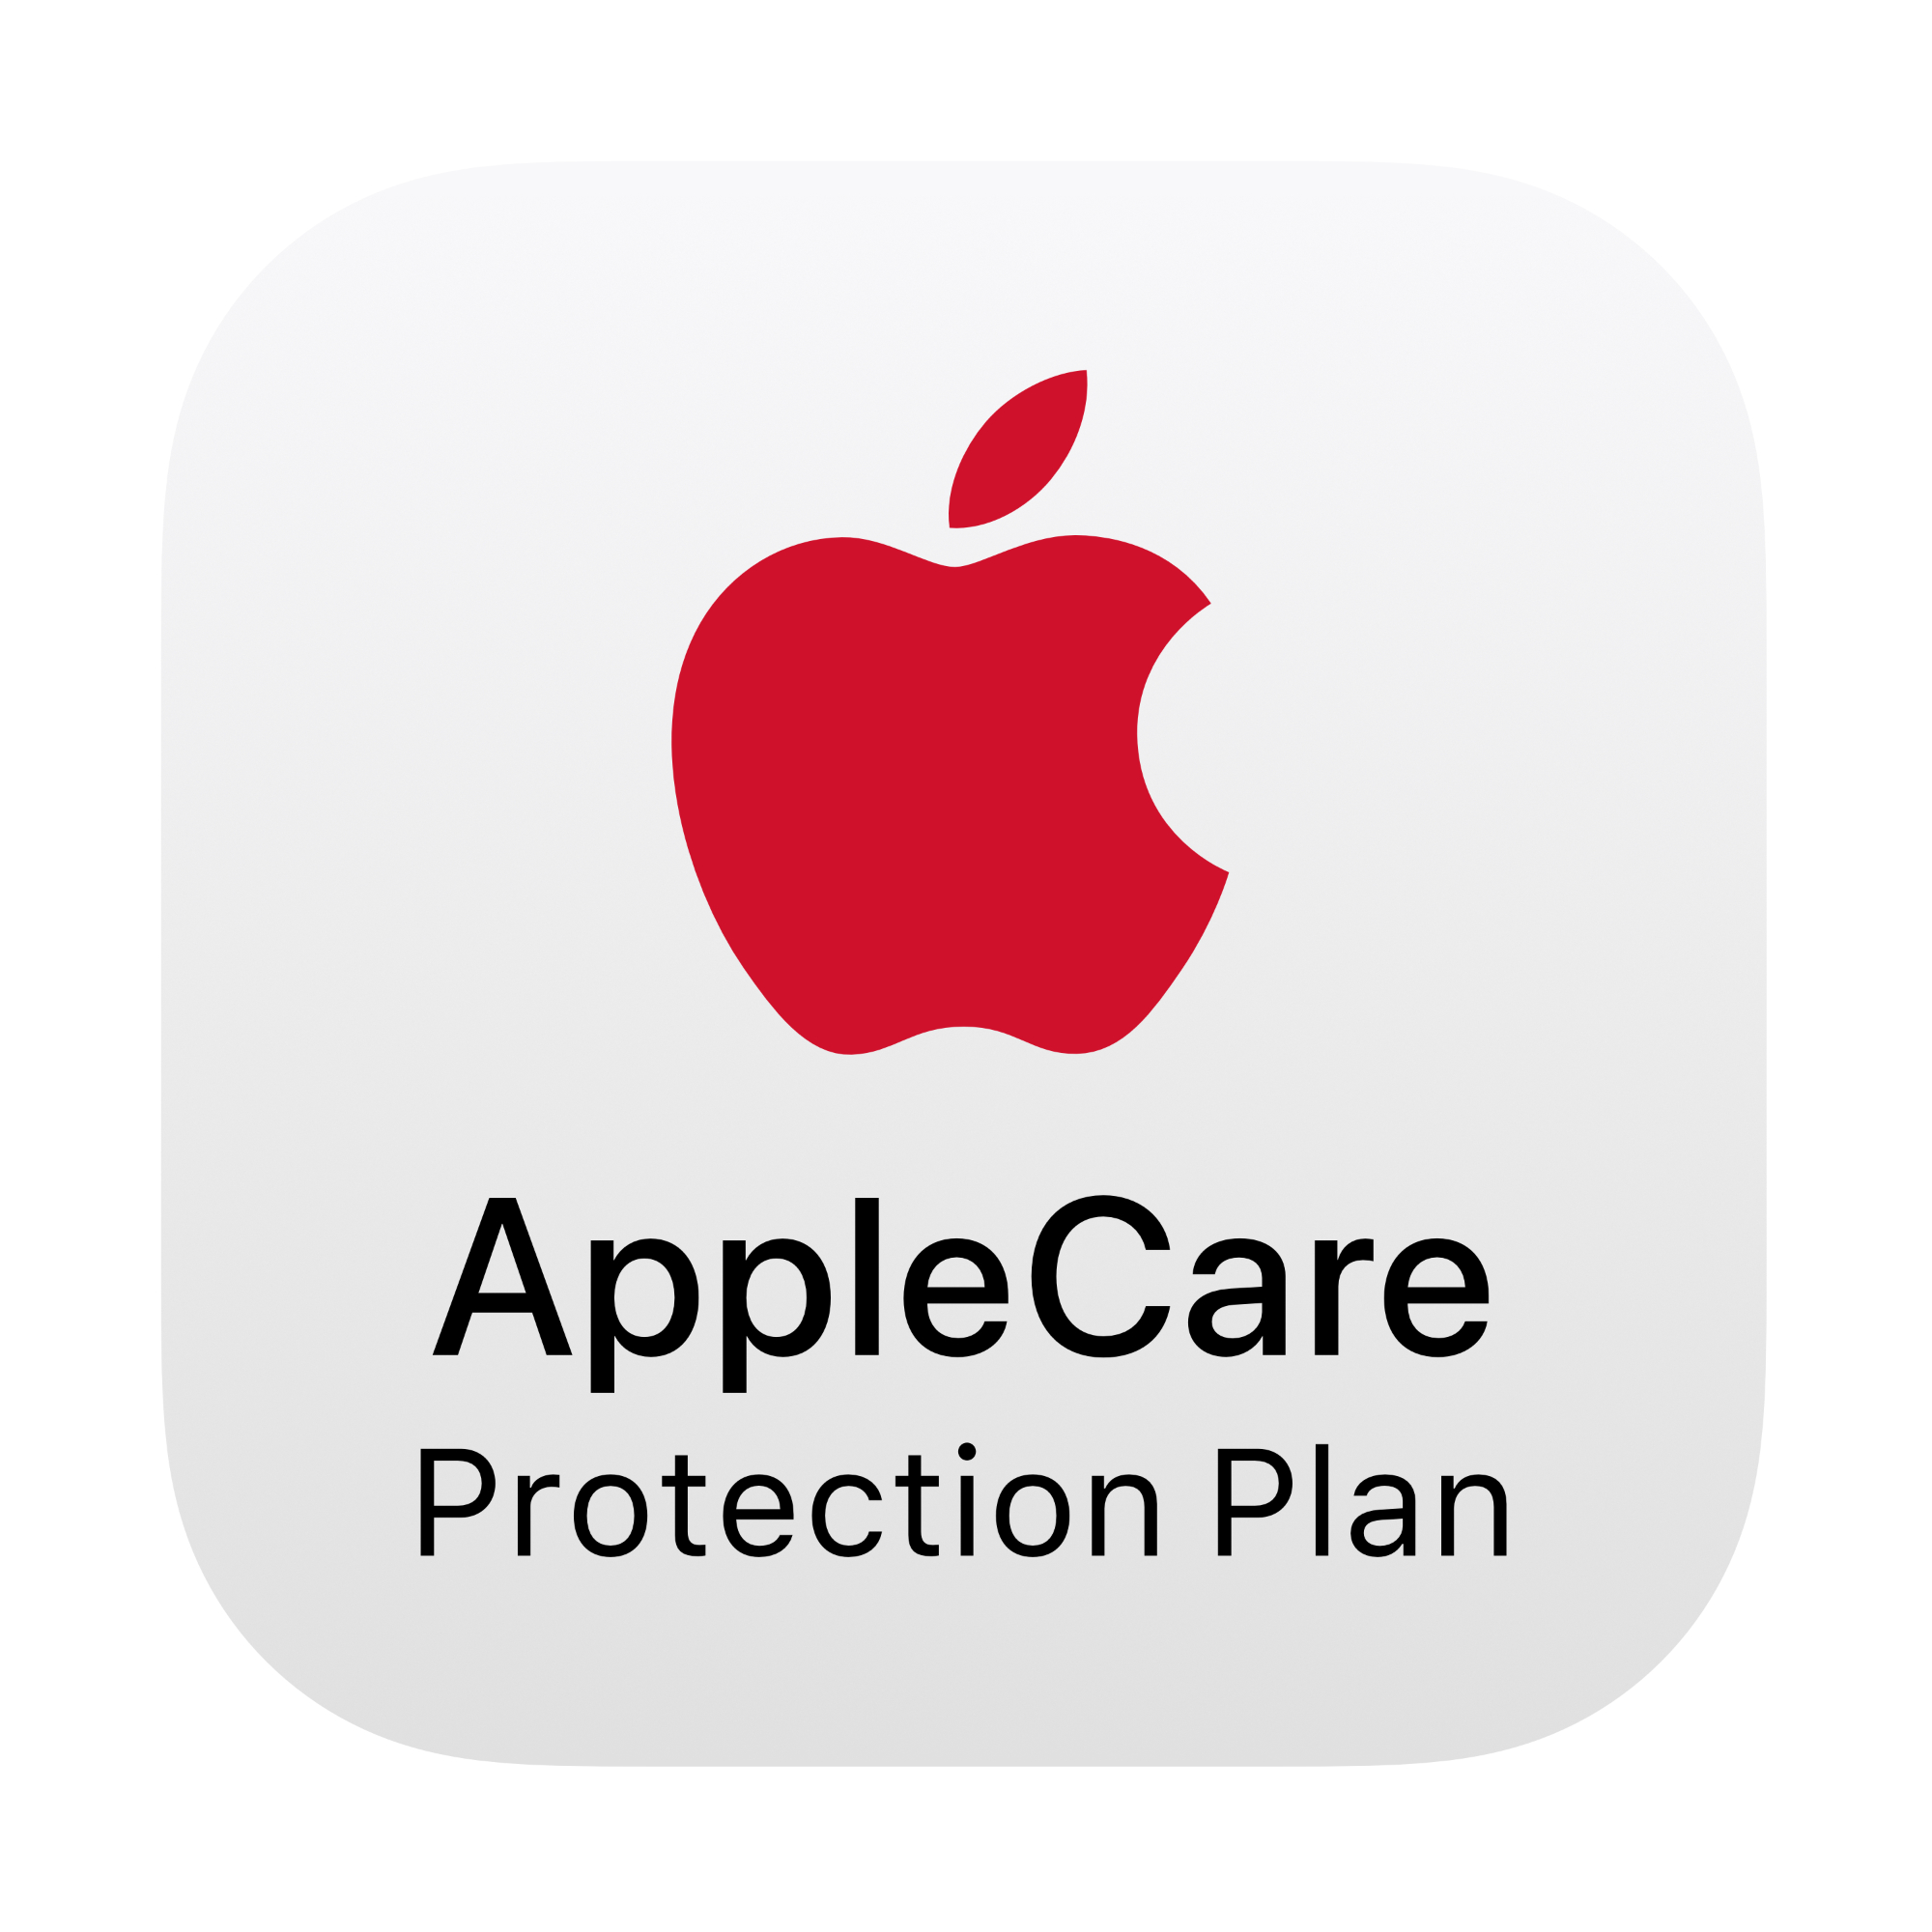 AppleCare Protection Plan for 14-in MB Pro (M3 Pro/M3 Max)